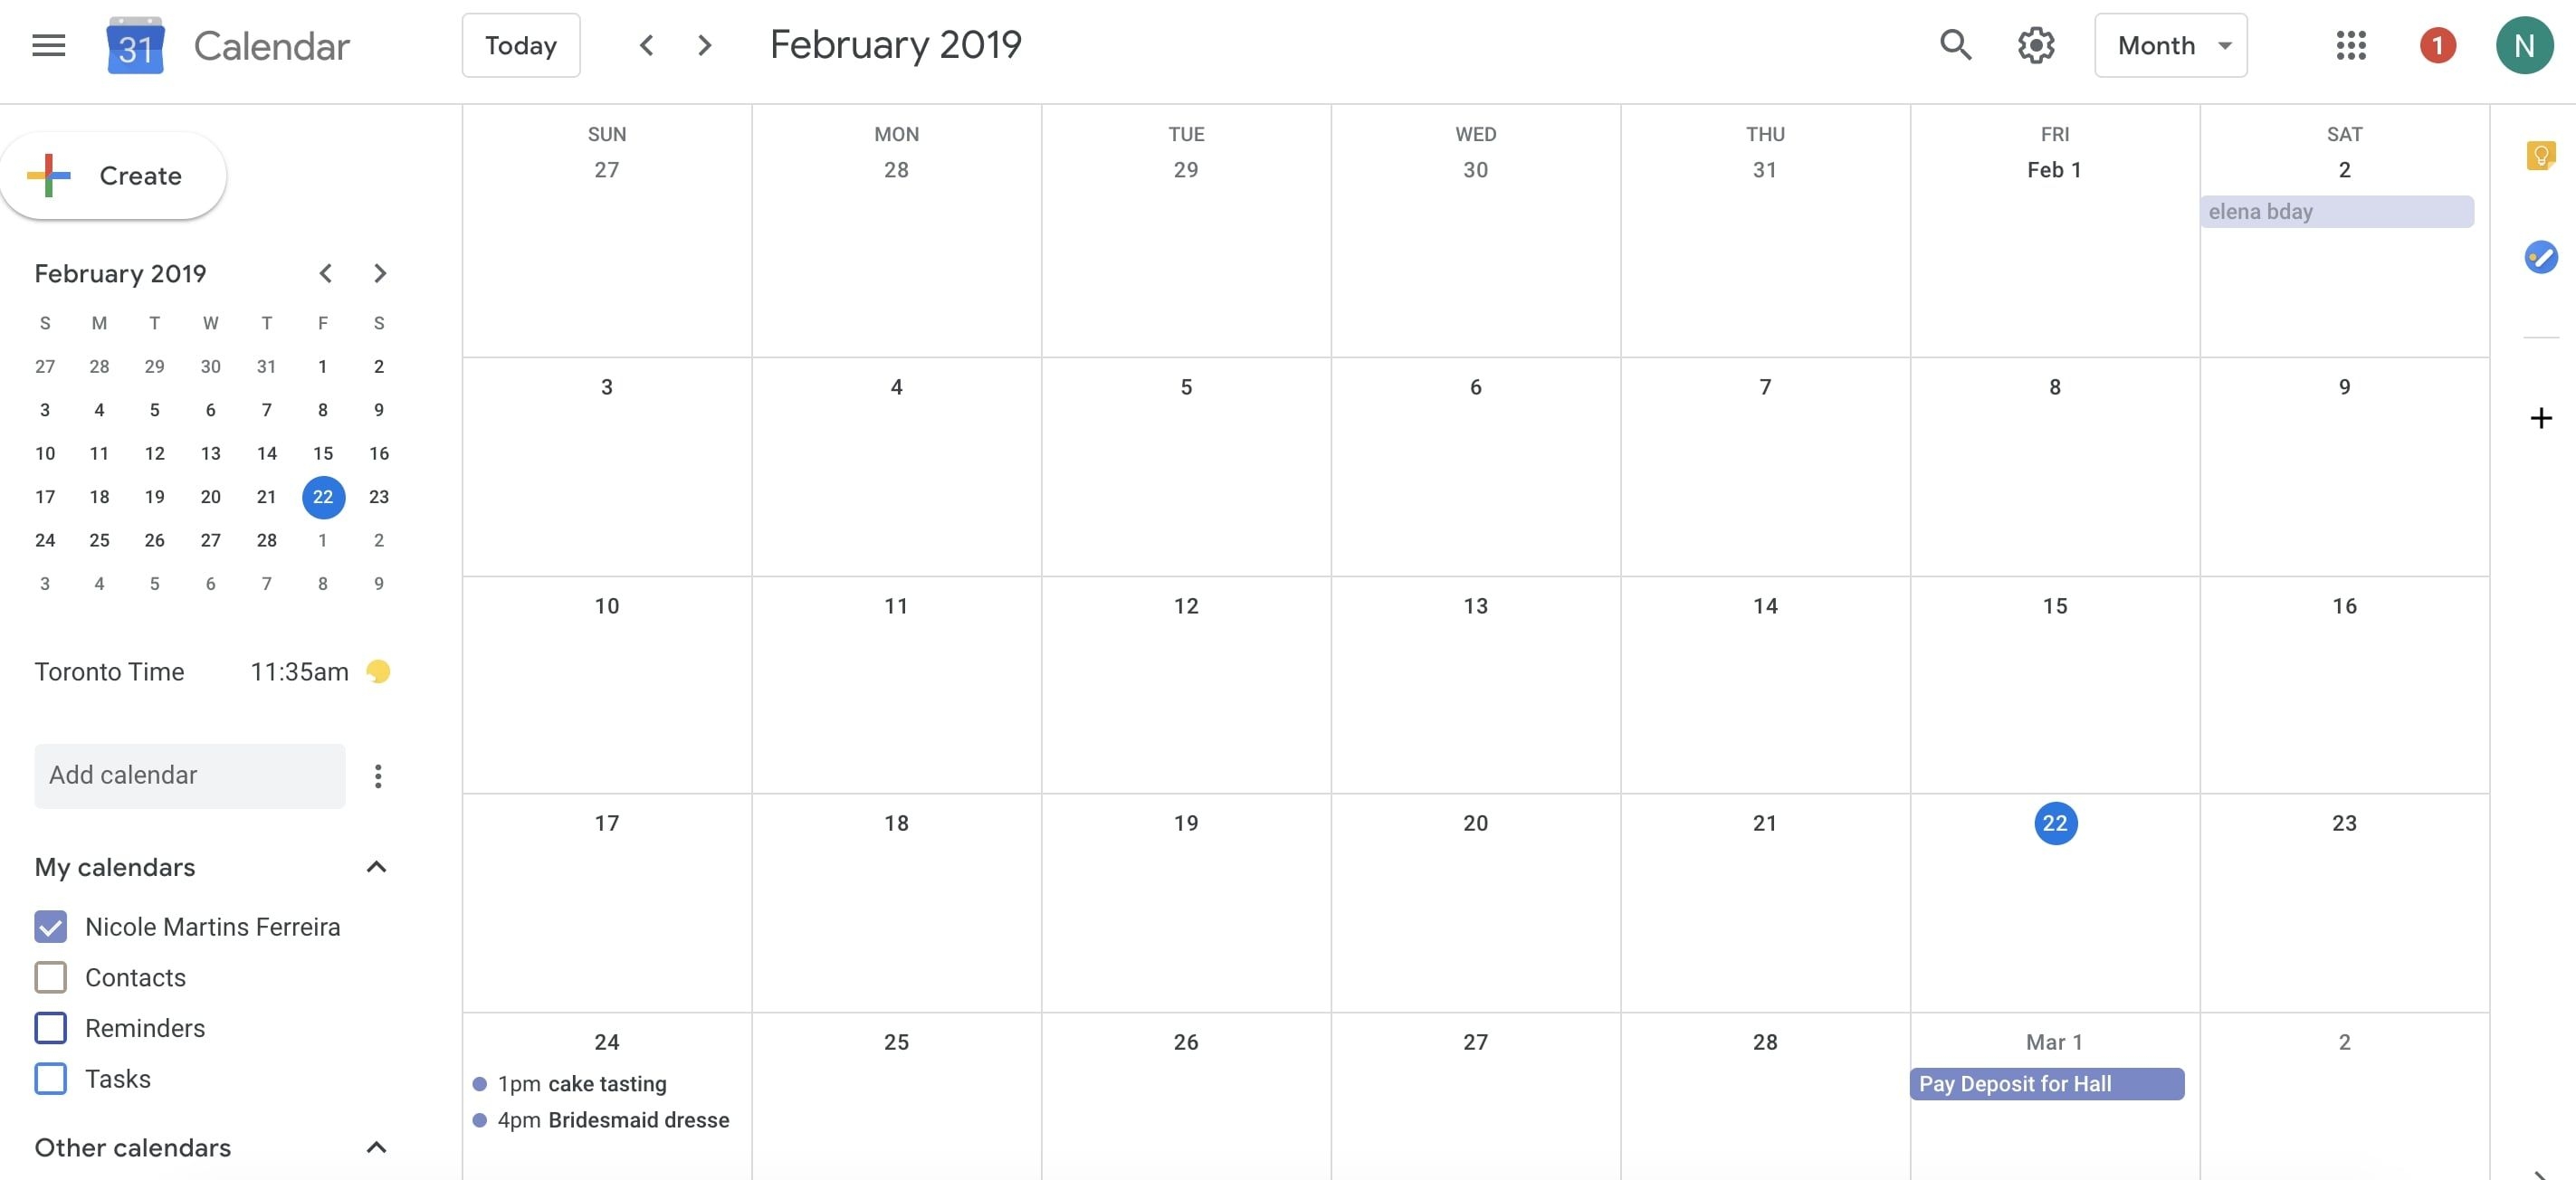 20 Ways To Use Google Calendar To Maximize Your Day In 2020